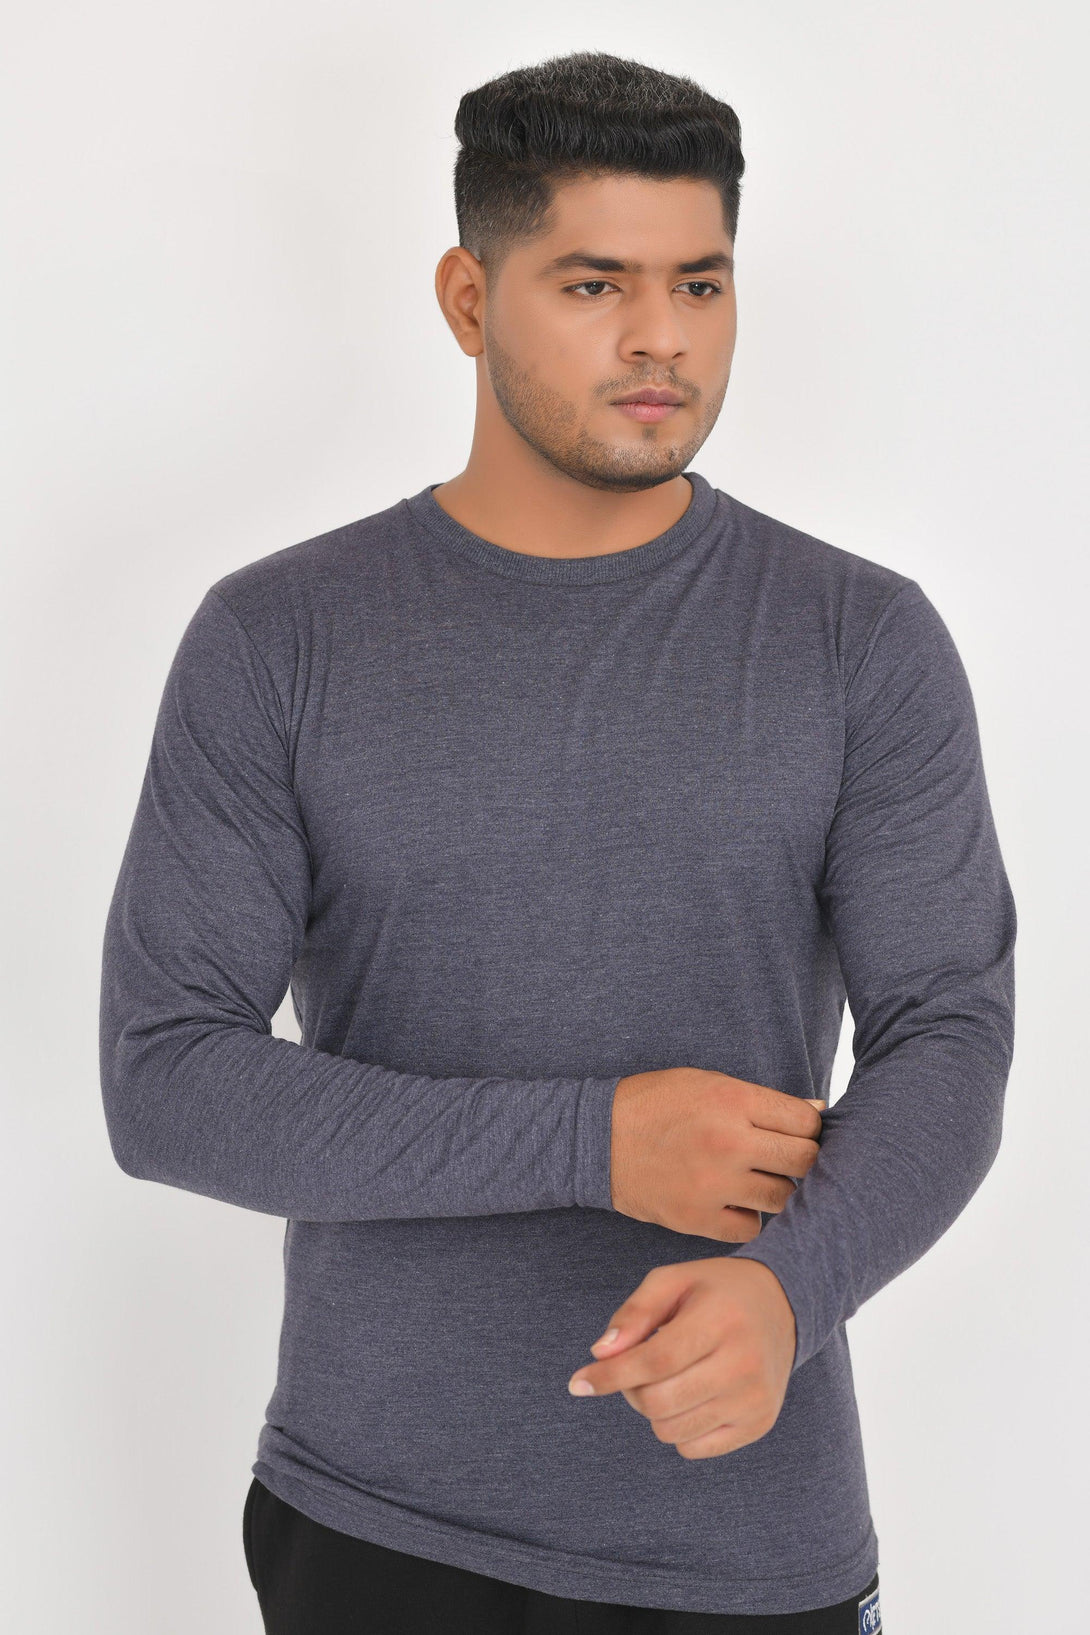 Long Sleeve Round Neck T-Shirts | NAVY- STONE - CHARCOAL - HUNTER GREEN - FTS